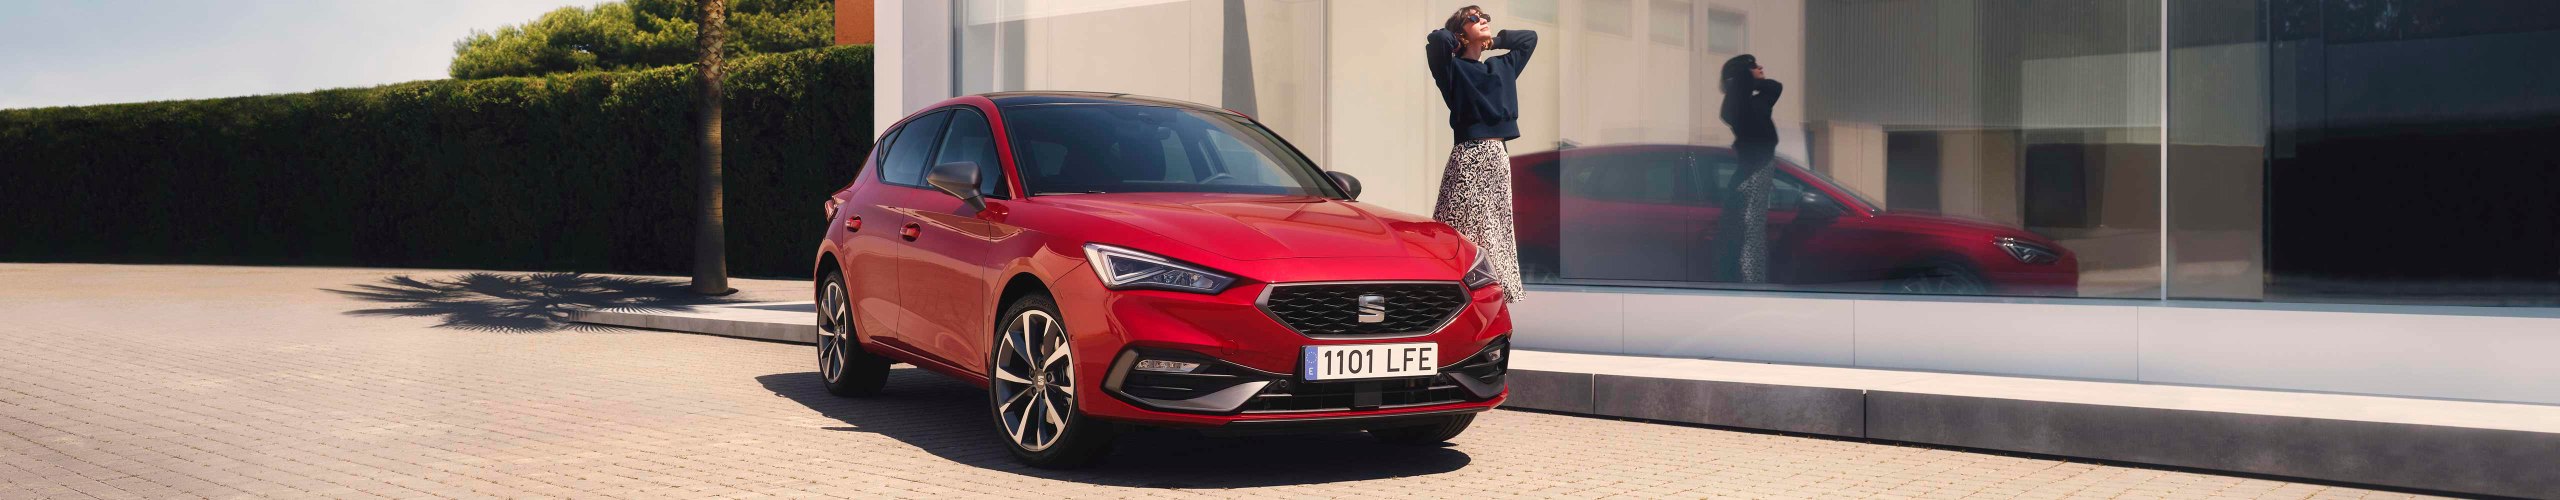 Woman standing next to SEAT Leon desire red colour